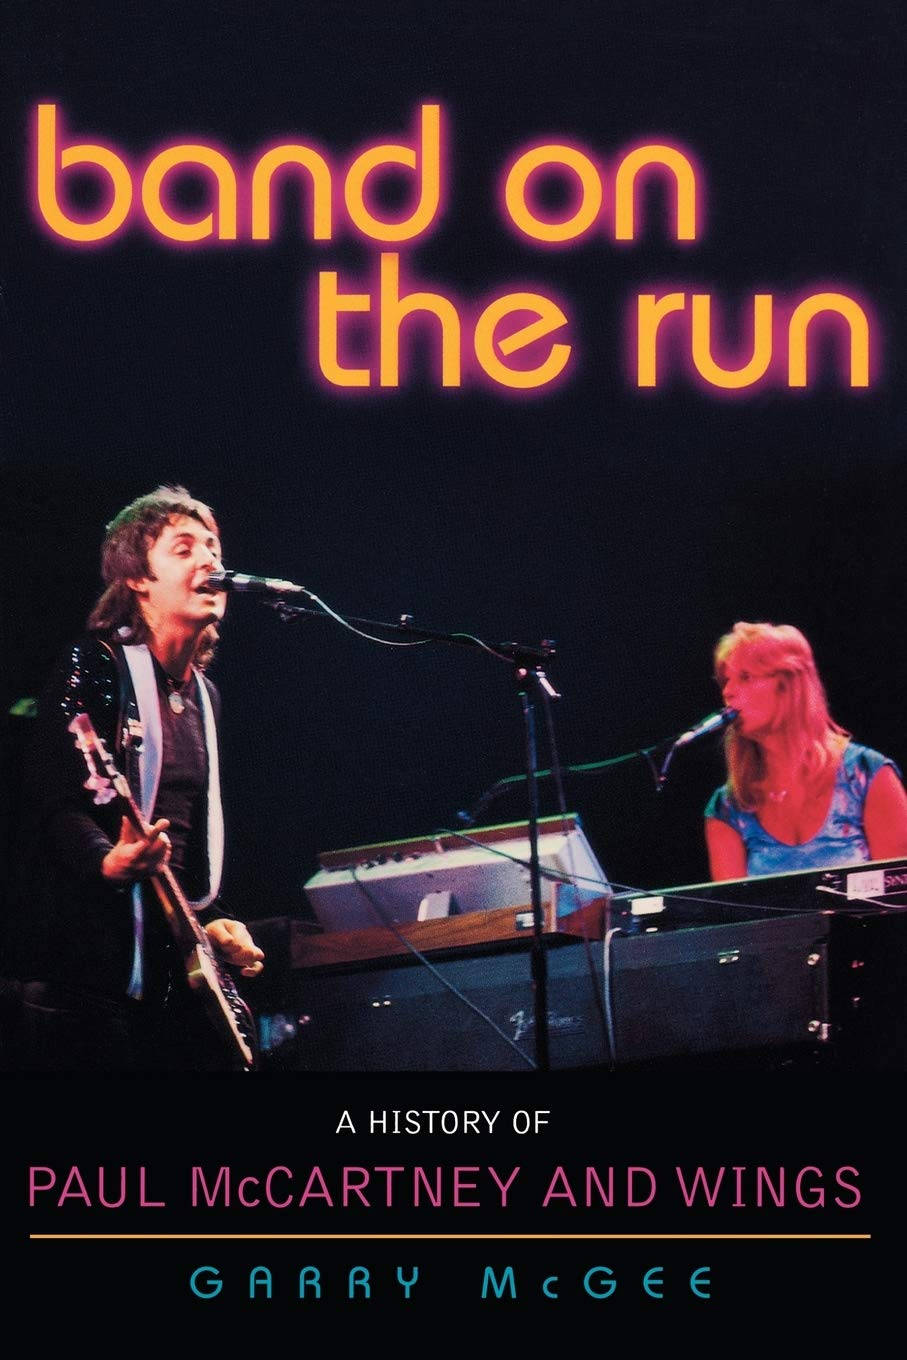 Paul Mccartney And Wings Band On The Run Book Wallpaper